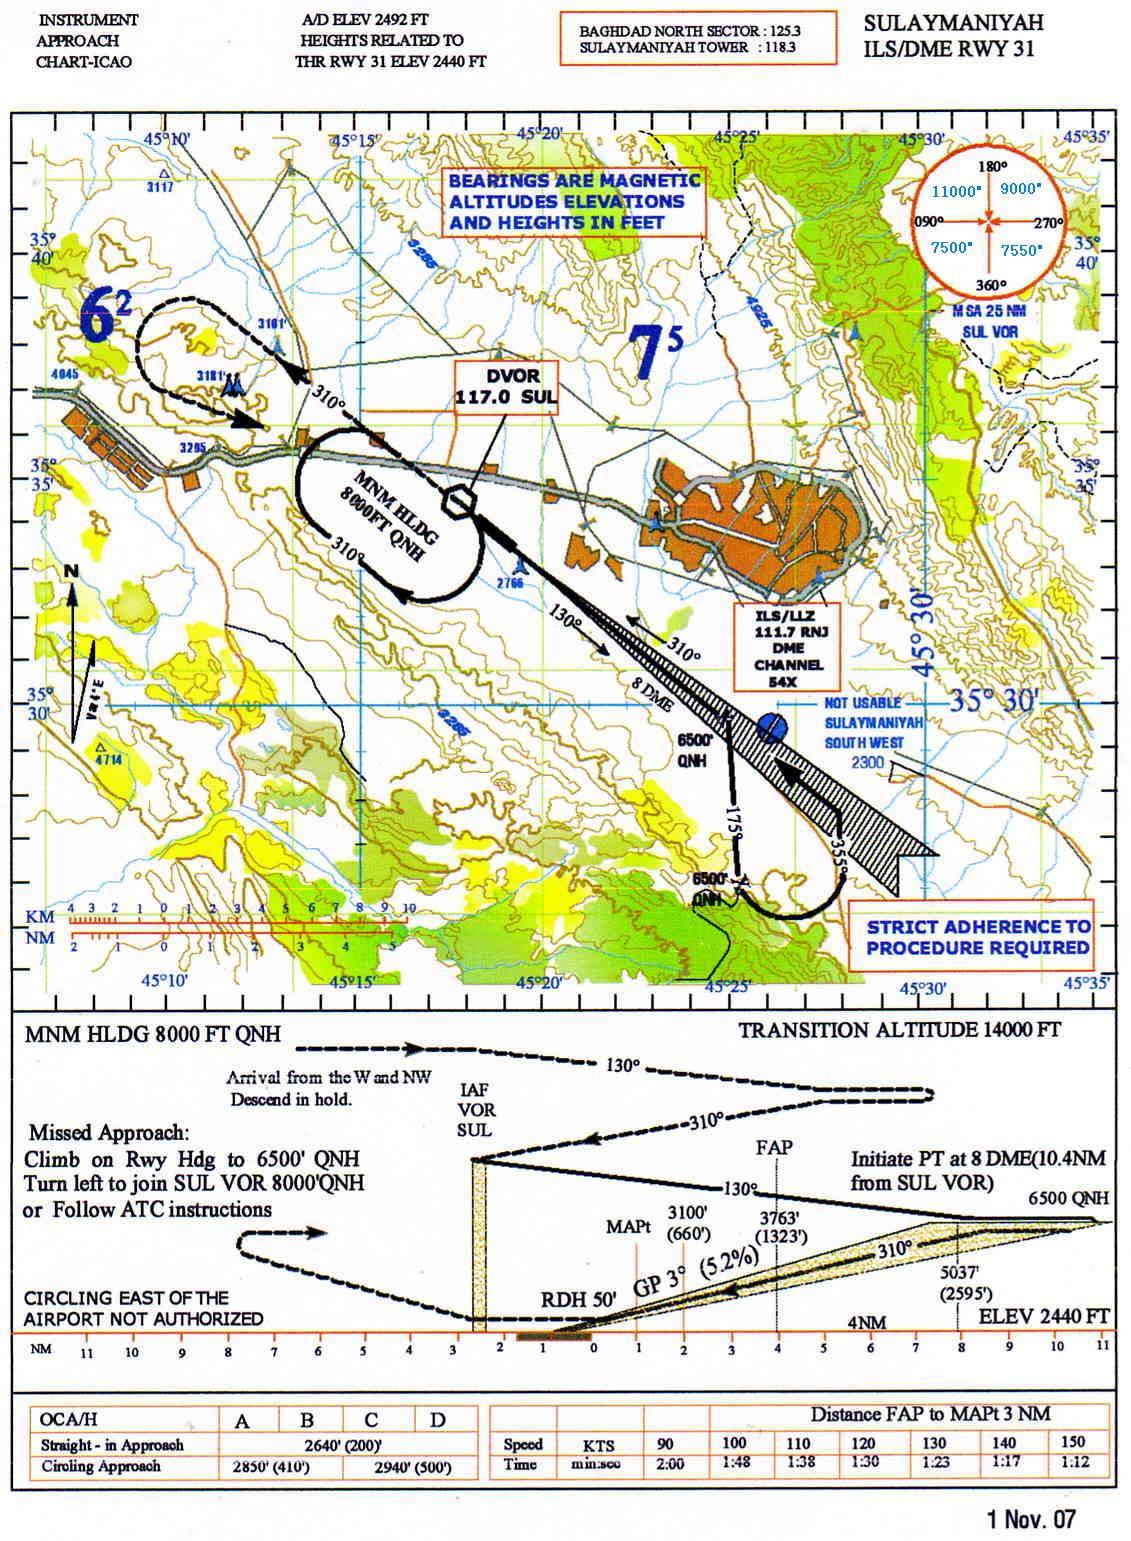 Aerodrome Obstacle Chart Icao Type A